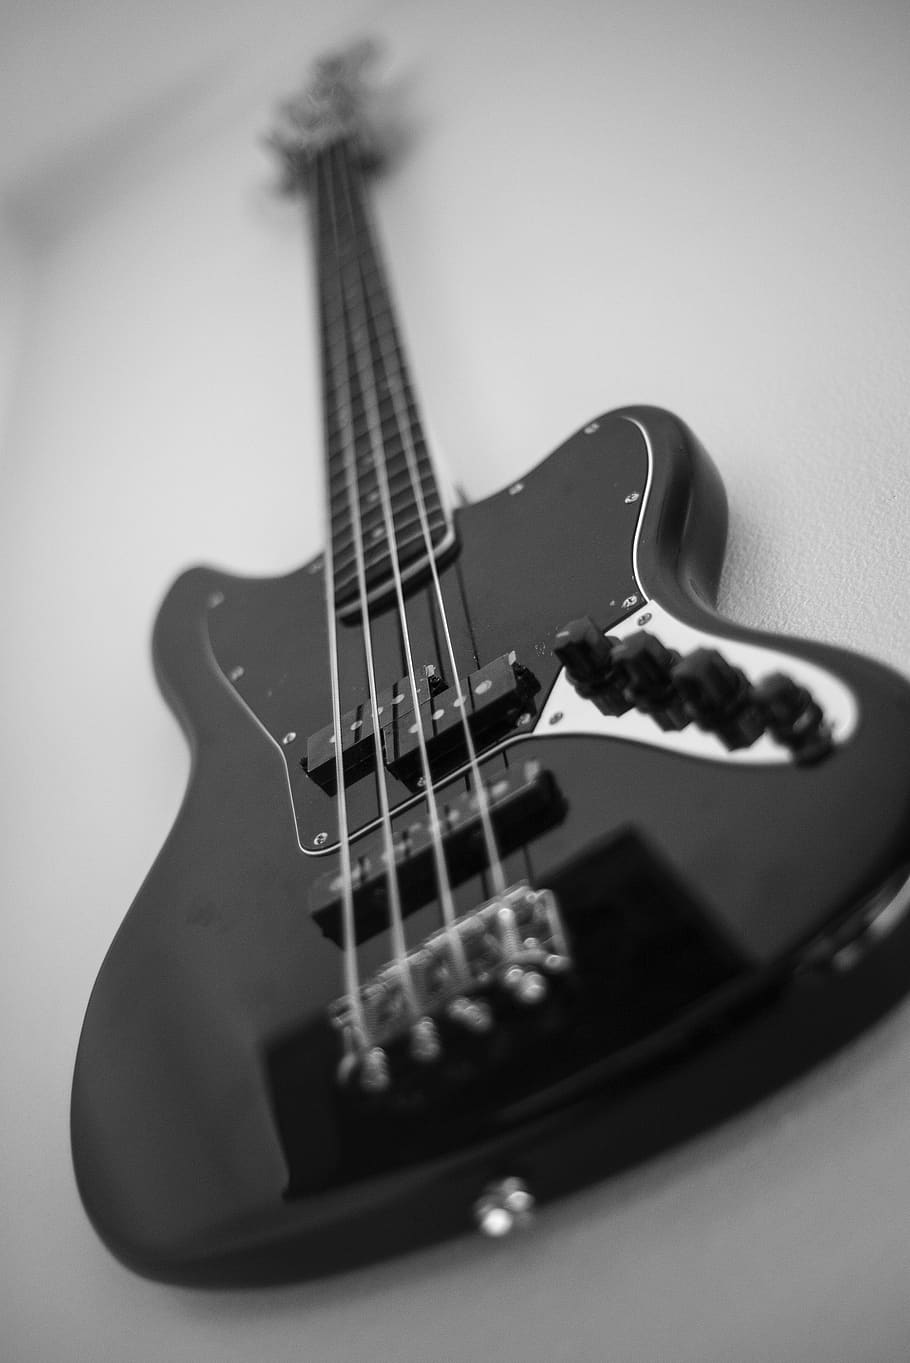 Hd Wallpaper United States Lake Worth Guitar Bass Fender Black And White Wallpaper Flare